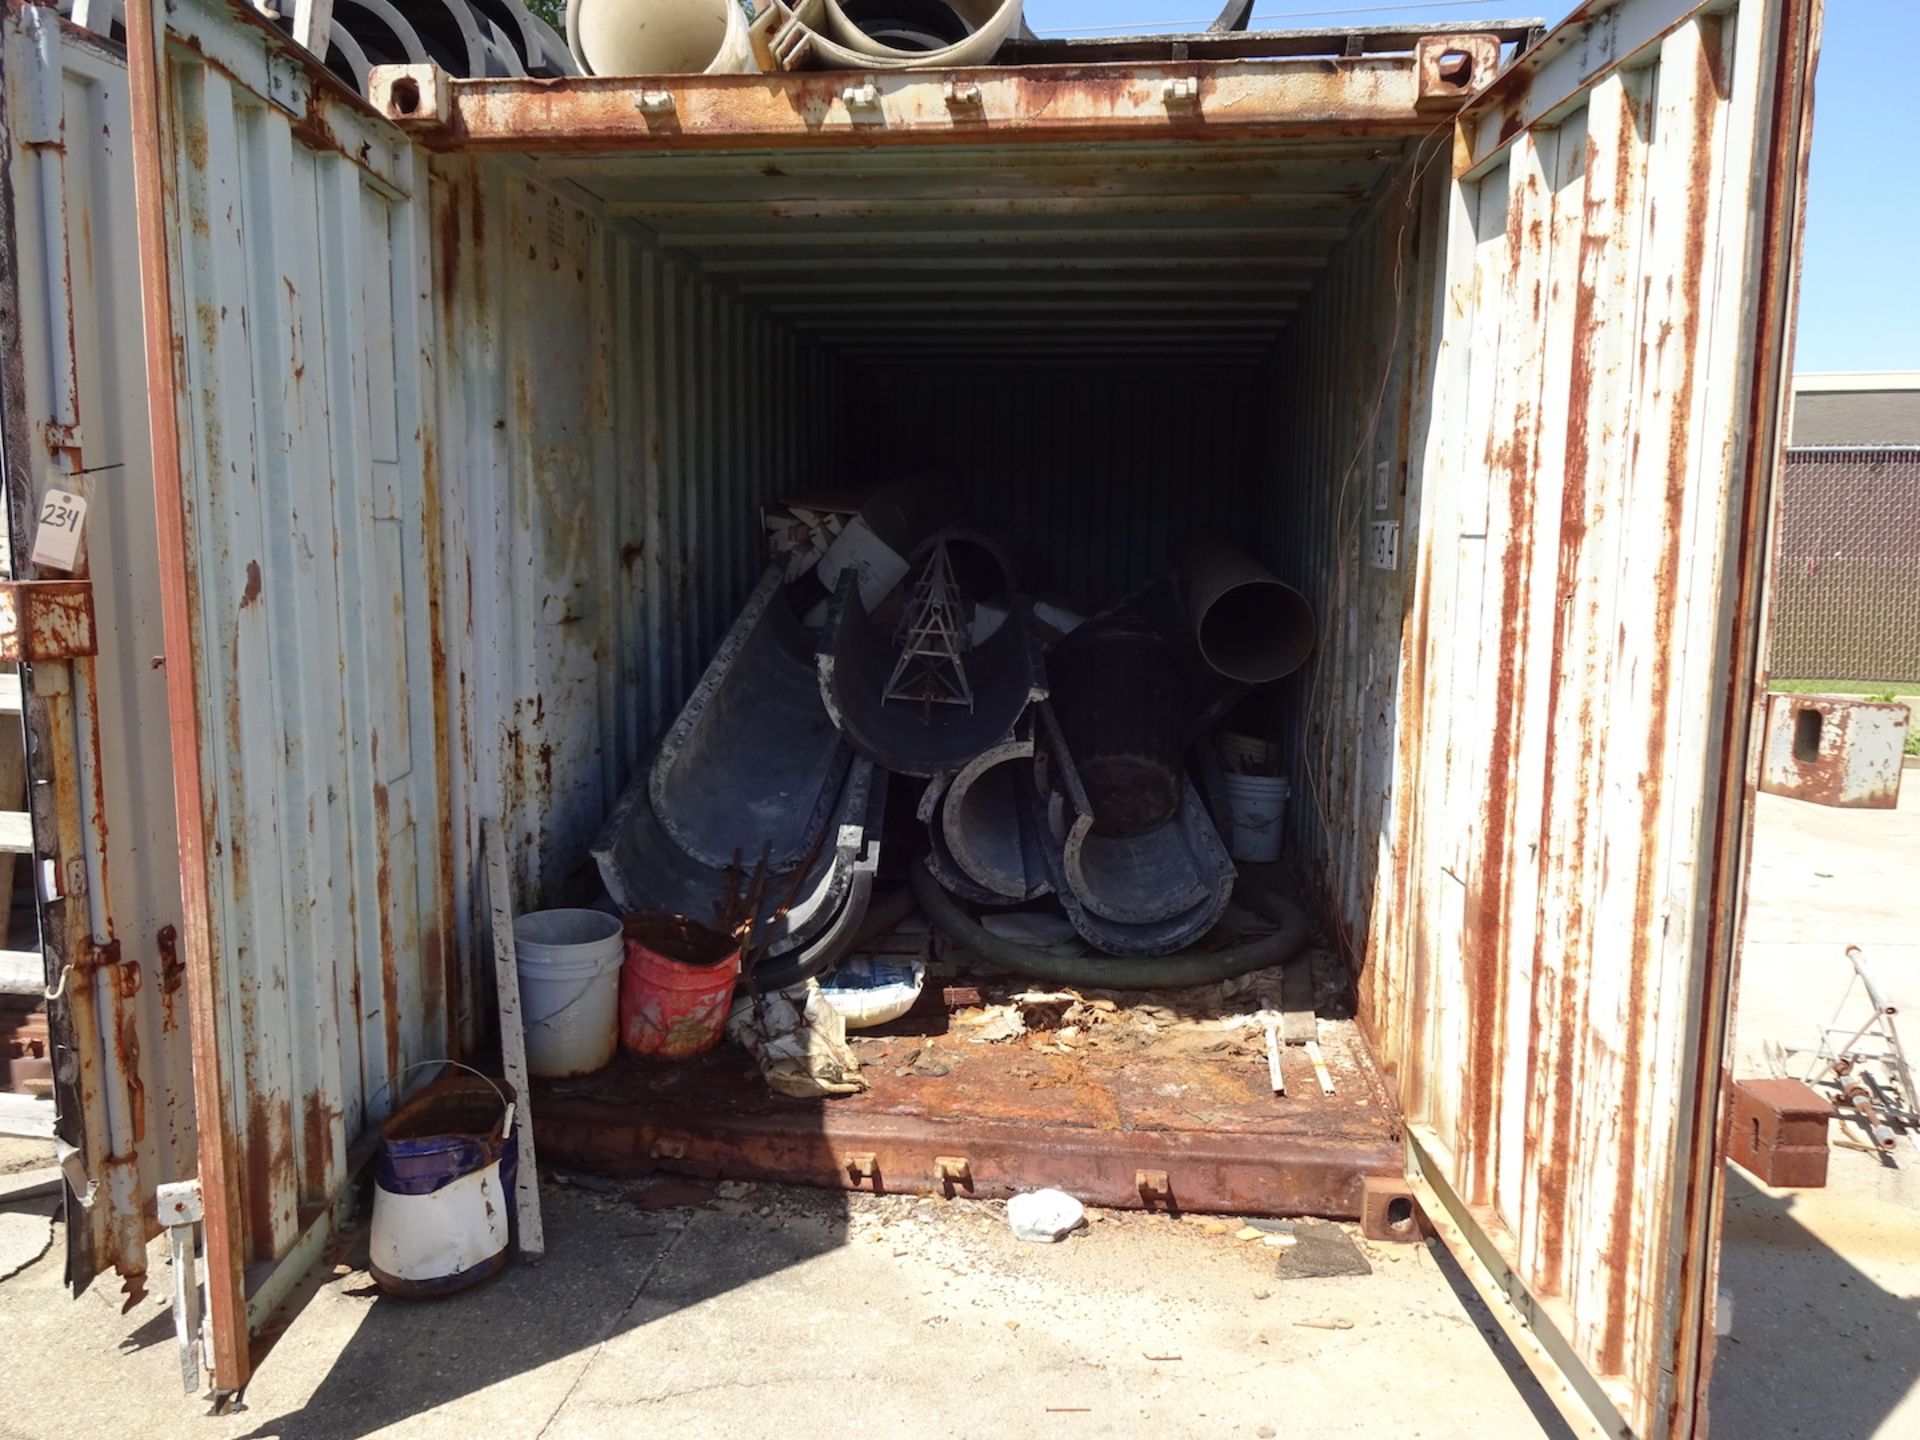 19' 10" LONG x 92"W x 89"H SHIPPING CONTAINER, **DOES NOT INCLUDE CONTENTS** - Image 2 of 2